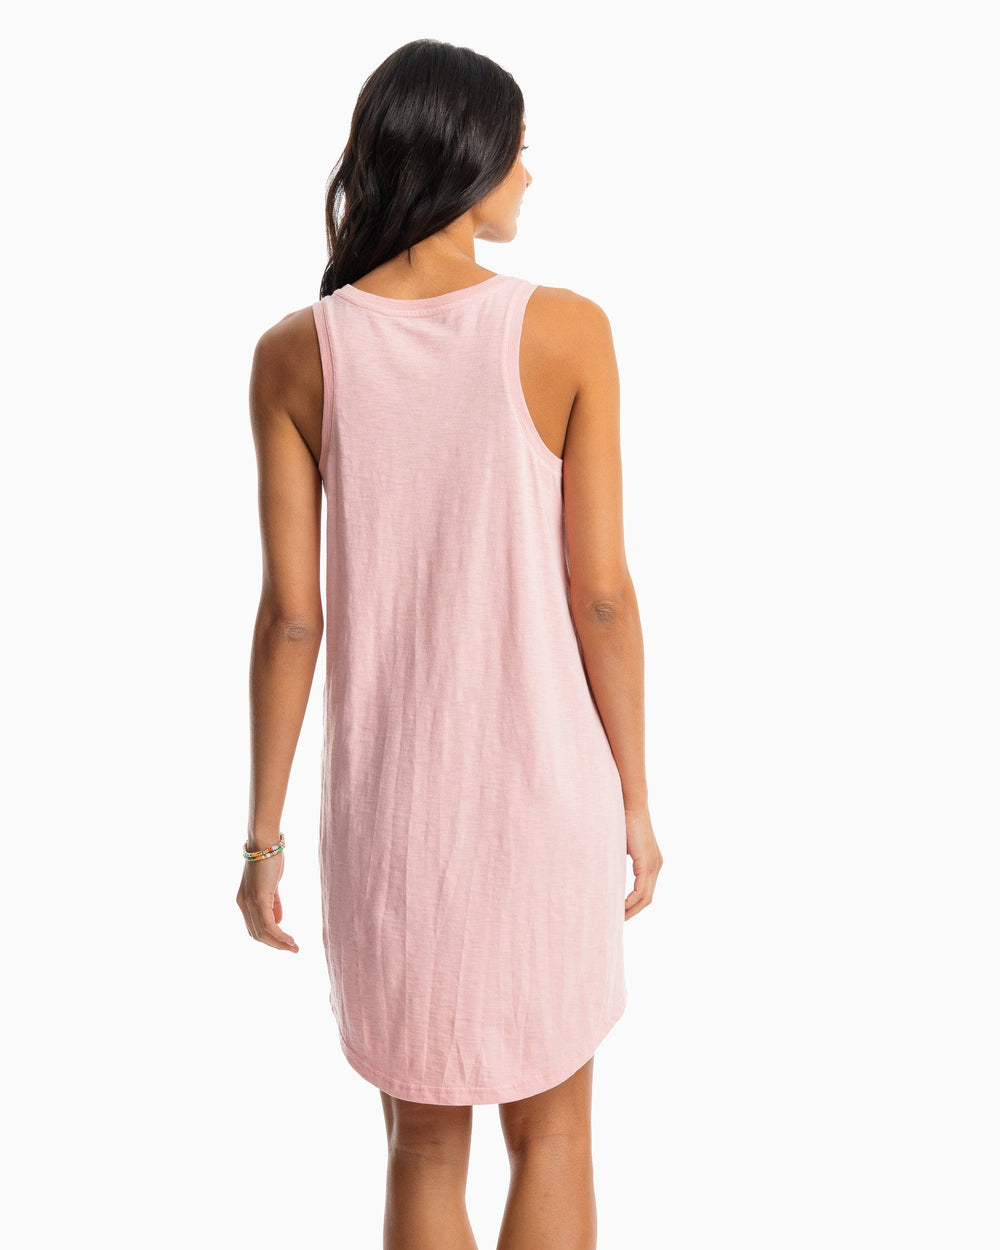 The model back view of the Women's Portia Sun Farer Sleeveless Dress by Southern Tide - Quartz Pink